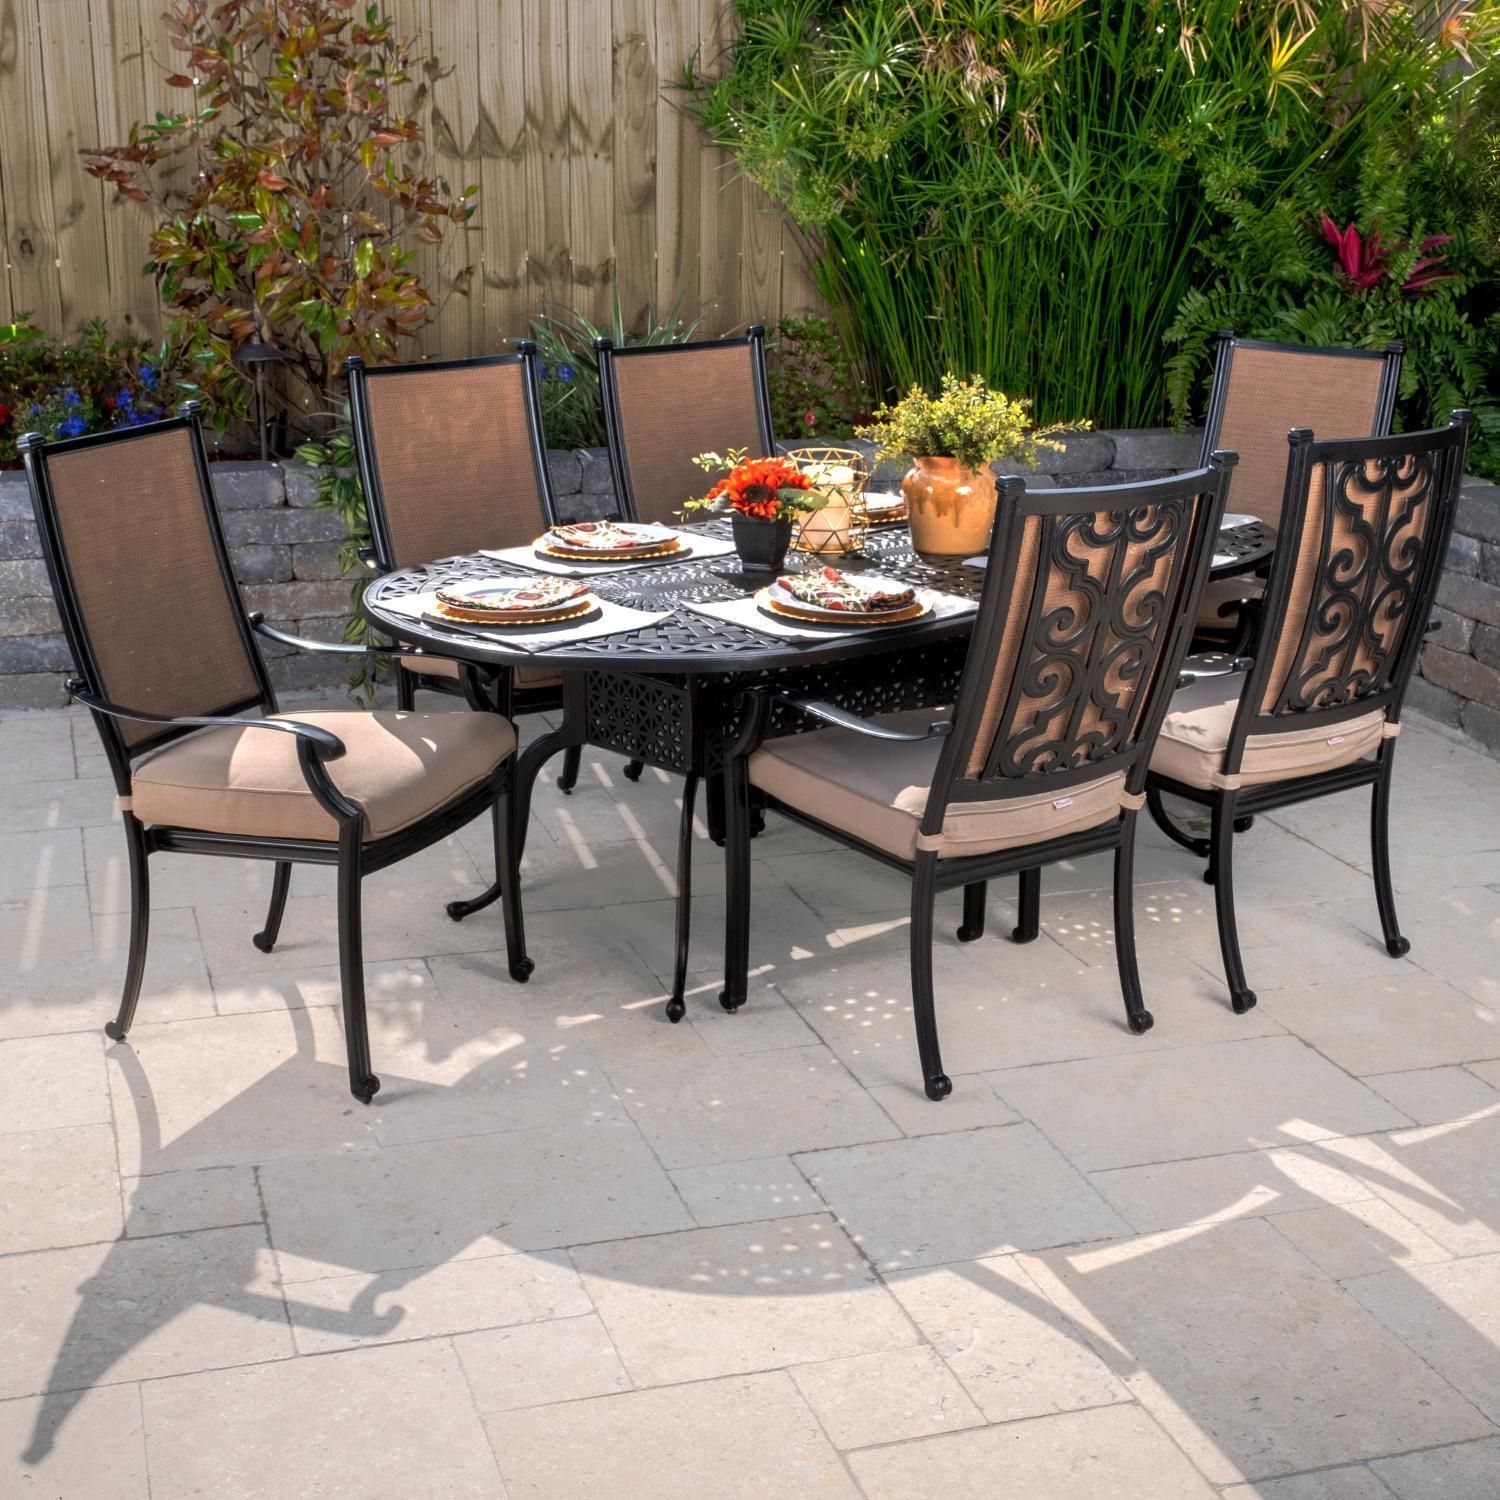 Bocage 7 Piece Cast Aluminum Sling Patio Dining Set W/ 84 X 42 Inch Within 7 Piece Patio Dining Sets With Cushions (View 3 of 15)